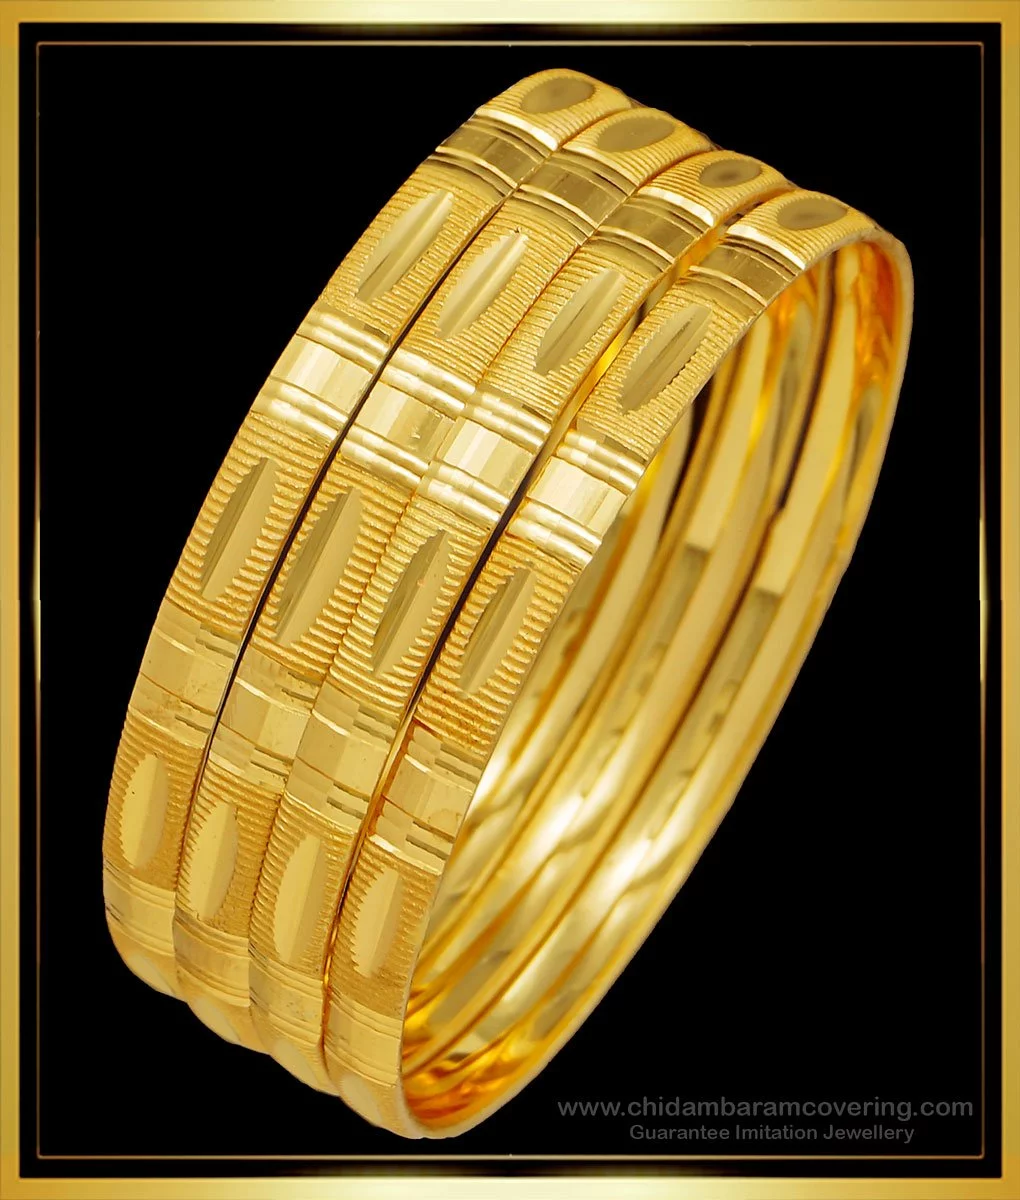 Buy New Model Gold Bangle Designs 4 Bangles Set for Daily Use